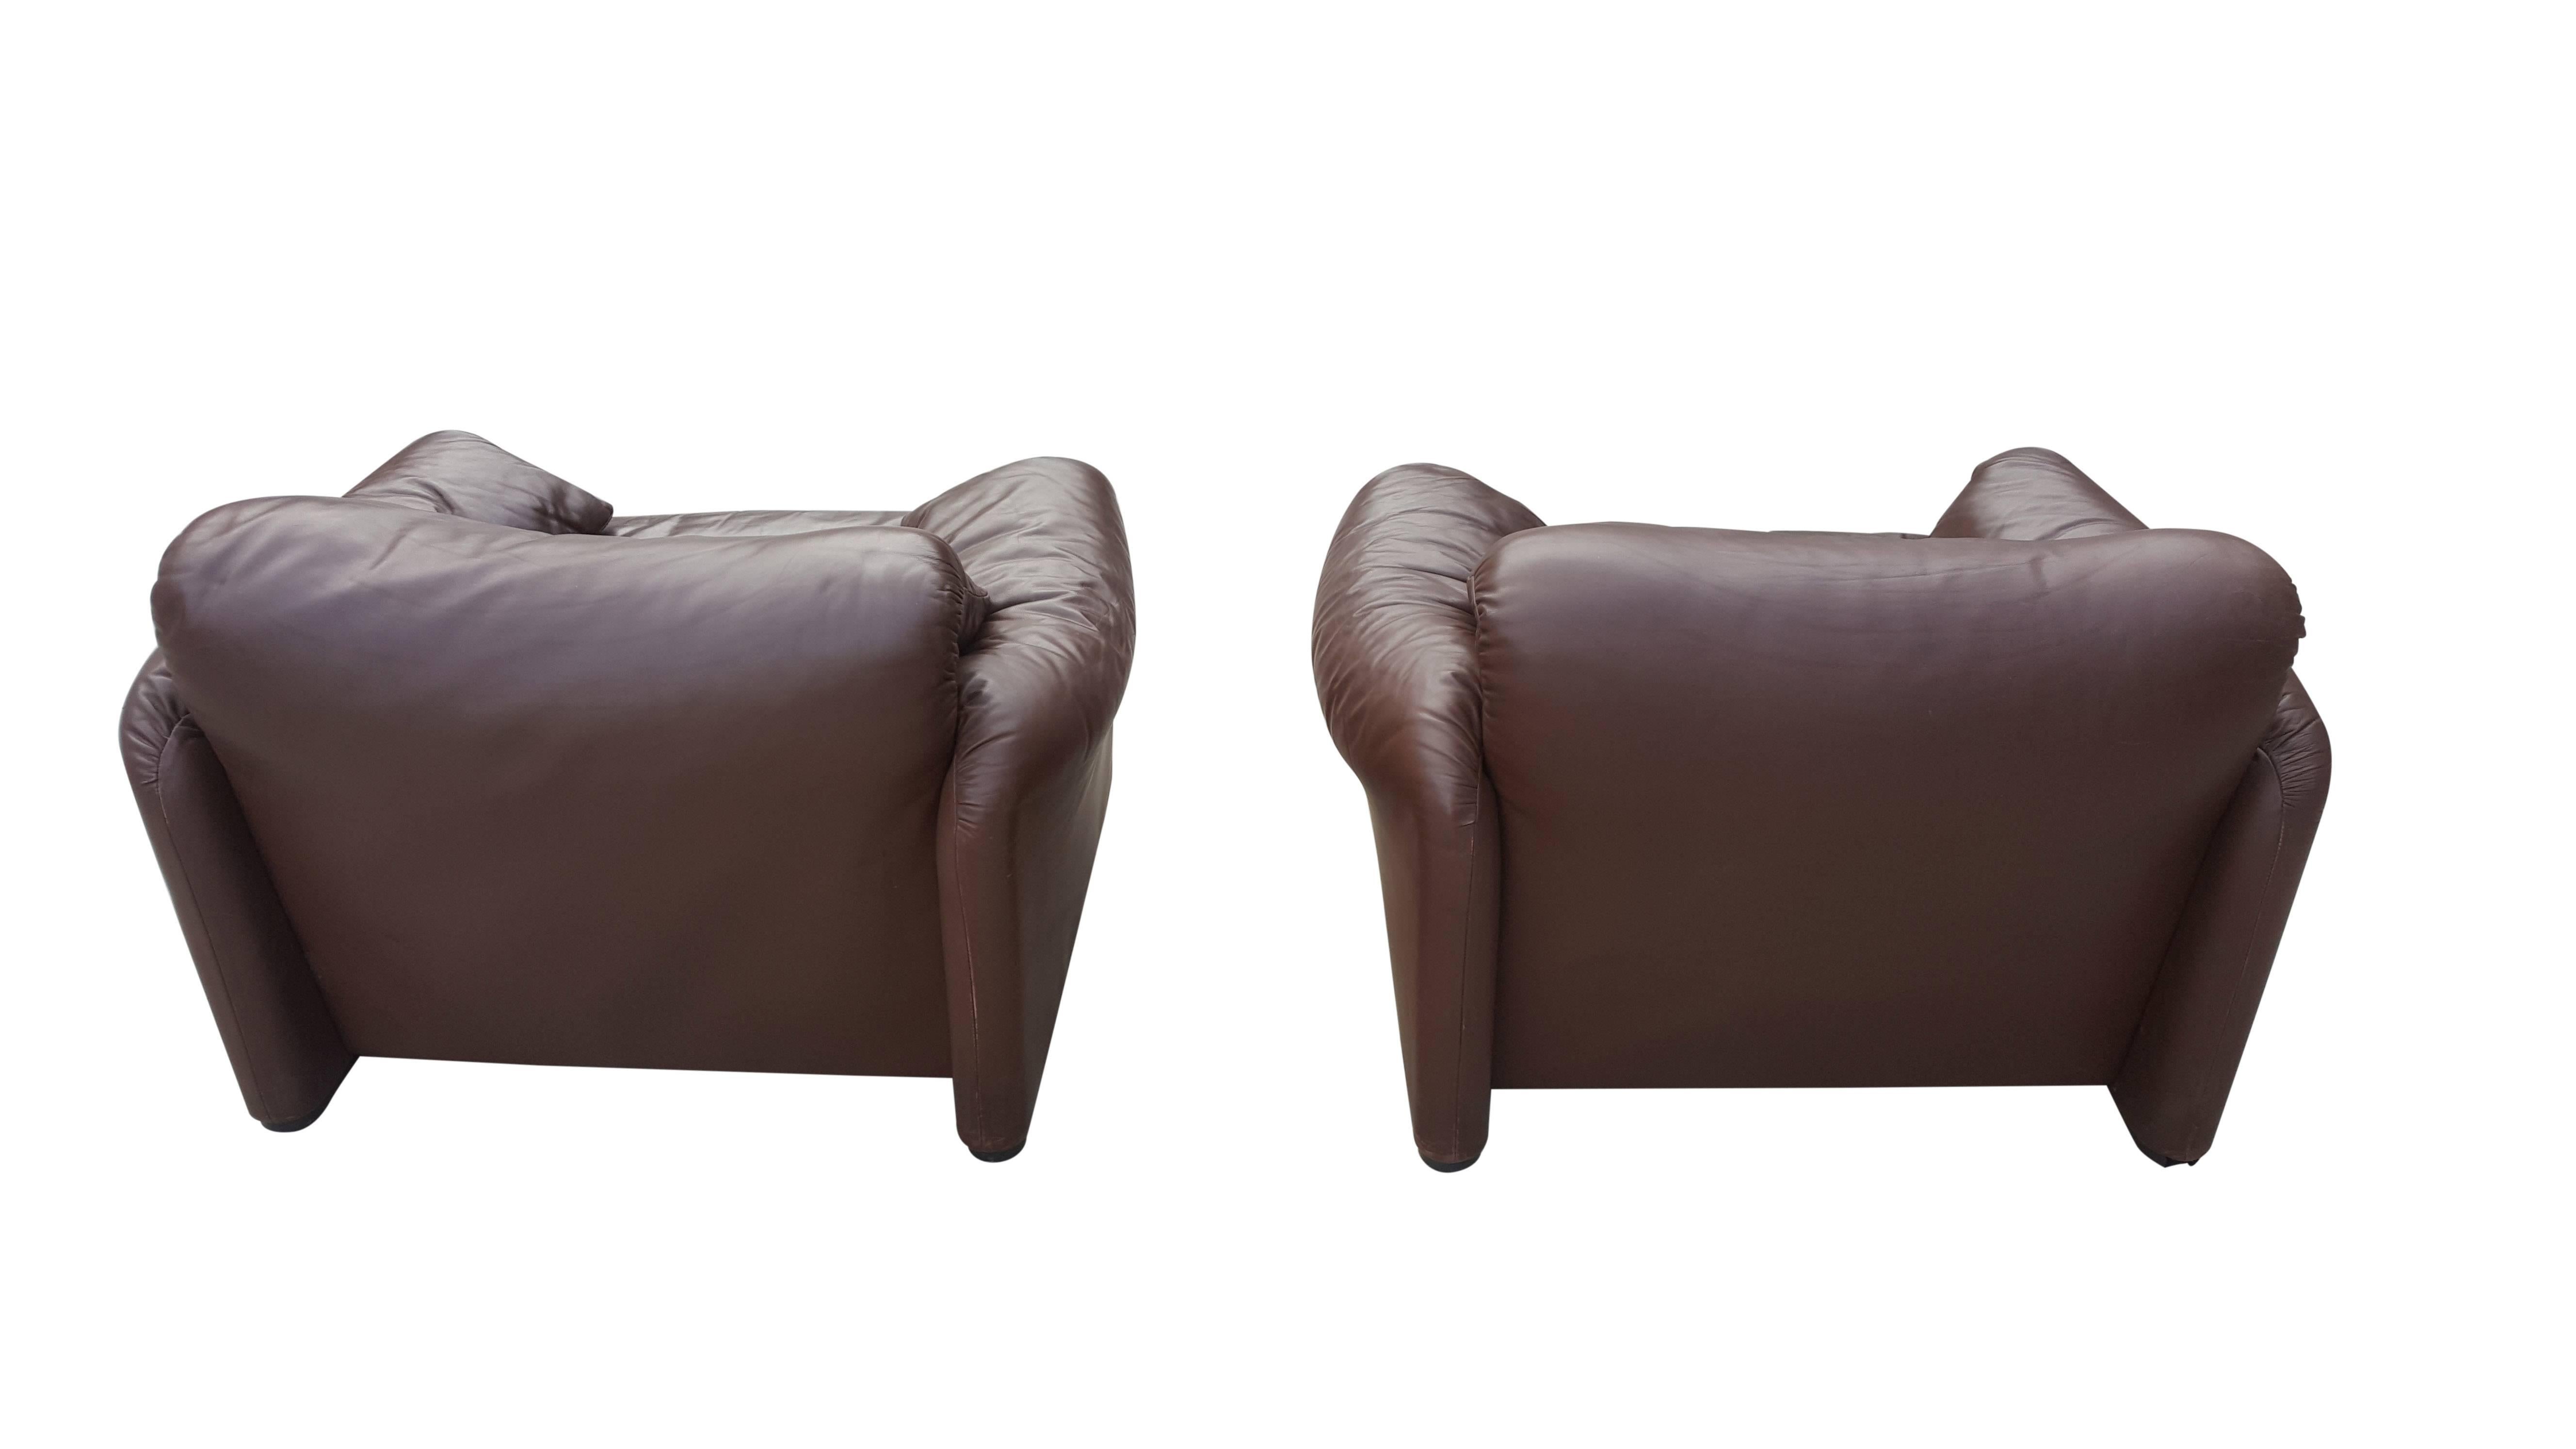 Leather Maralunga Brown Choclat Sofa Set by Vico Magistretti for Cassina